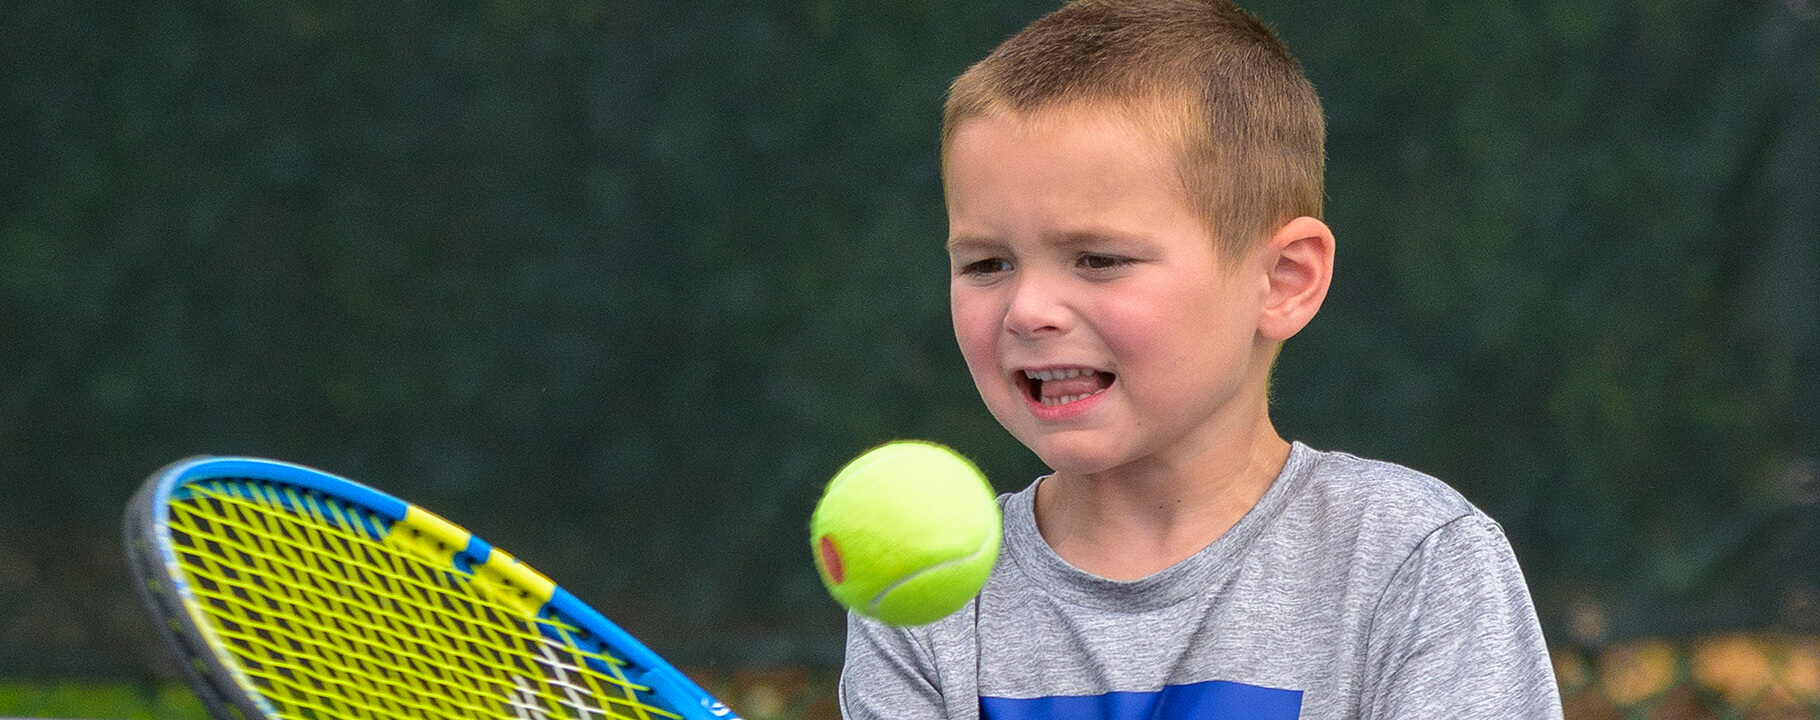 young boy hitting tennis ball with racquet